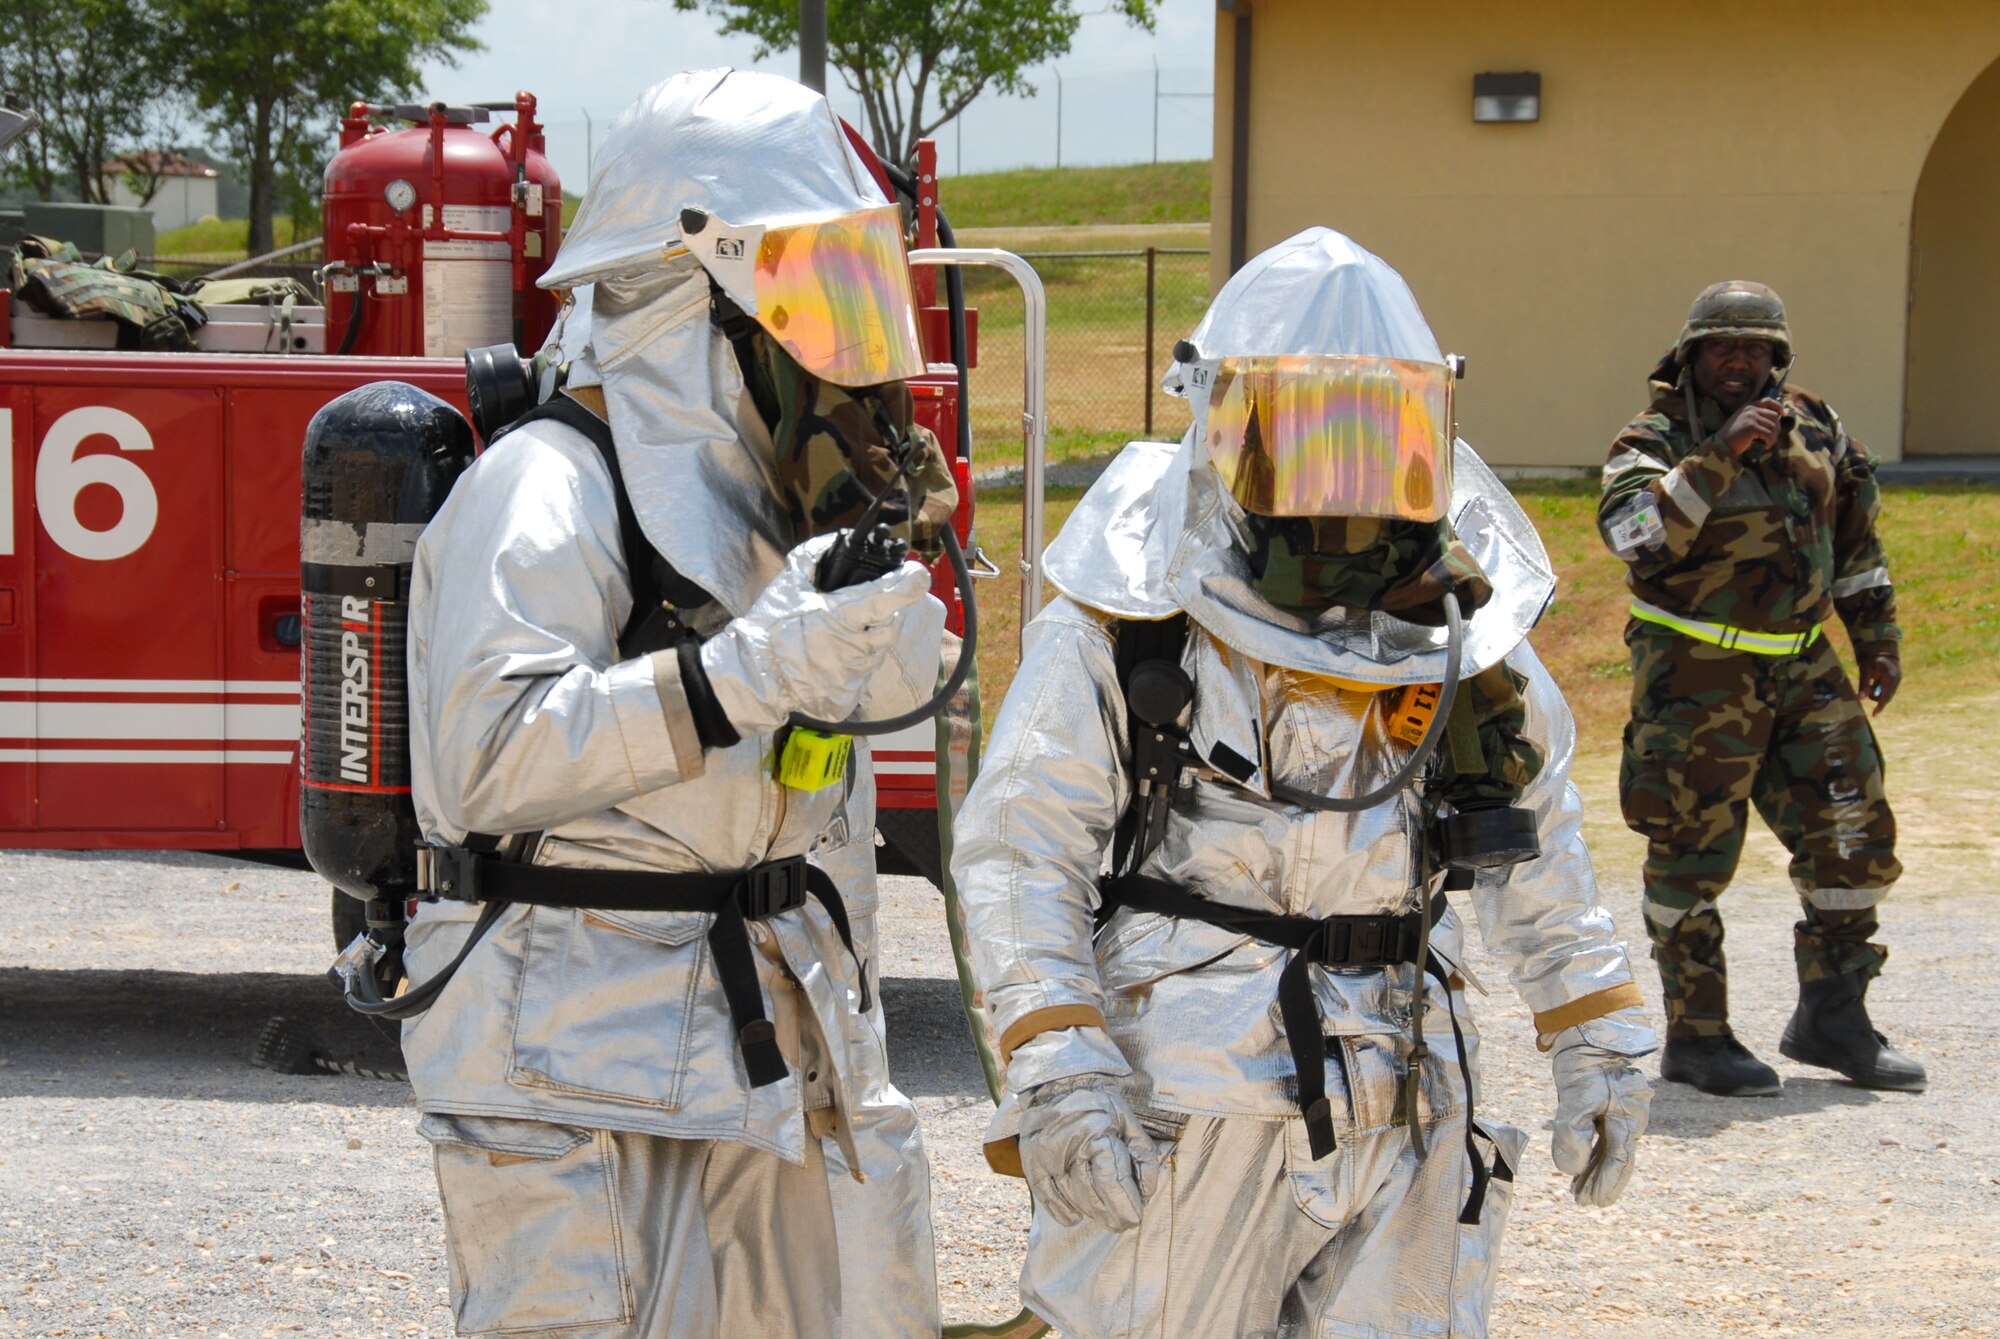 Members of the Maxwell Fire Department respond to an exercise call at Blue Thunder during the exercise. (U.S. Air Force photo by Jamie Pitcher)